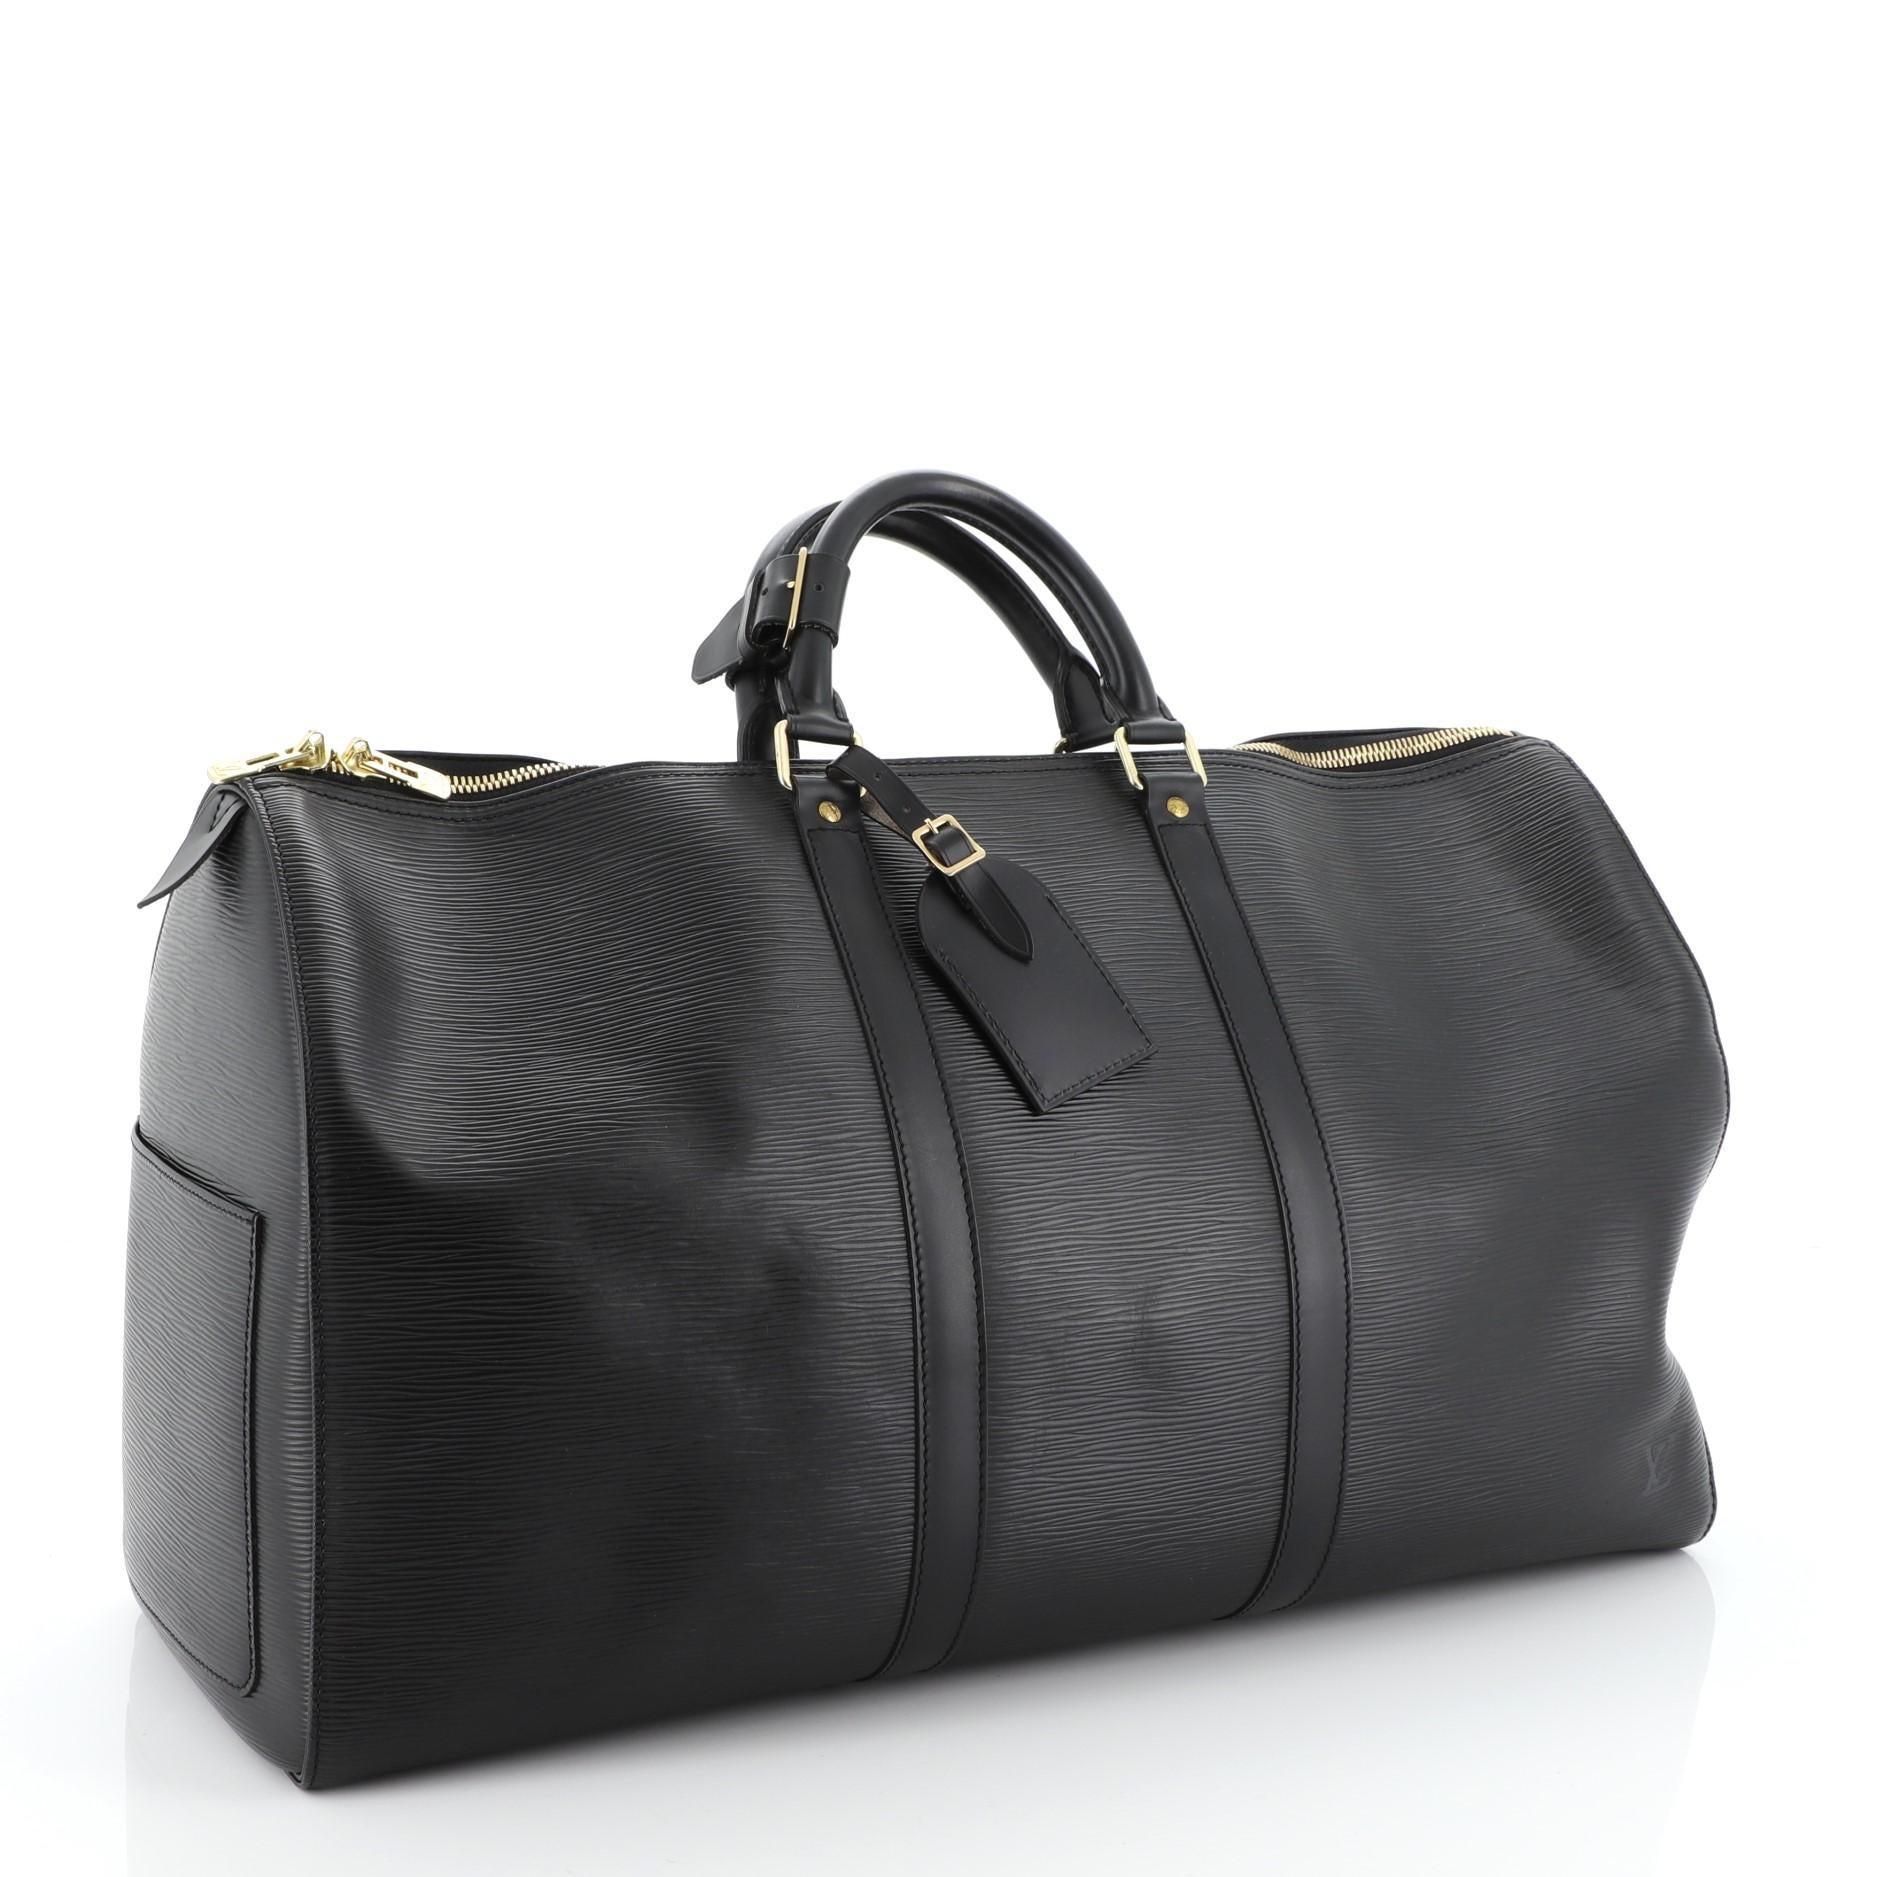 This Louis Vuitton Keepall Bag Epi Leather 55, crafted from black epi leather, features dual rolled handles, subtle LV logo and gold-tone hardware. Its zip closure opens to a black raw leather interior. Authenticity code reads: SP0012. 

Estimated